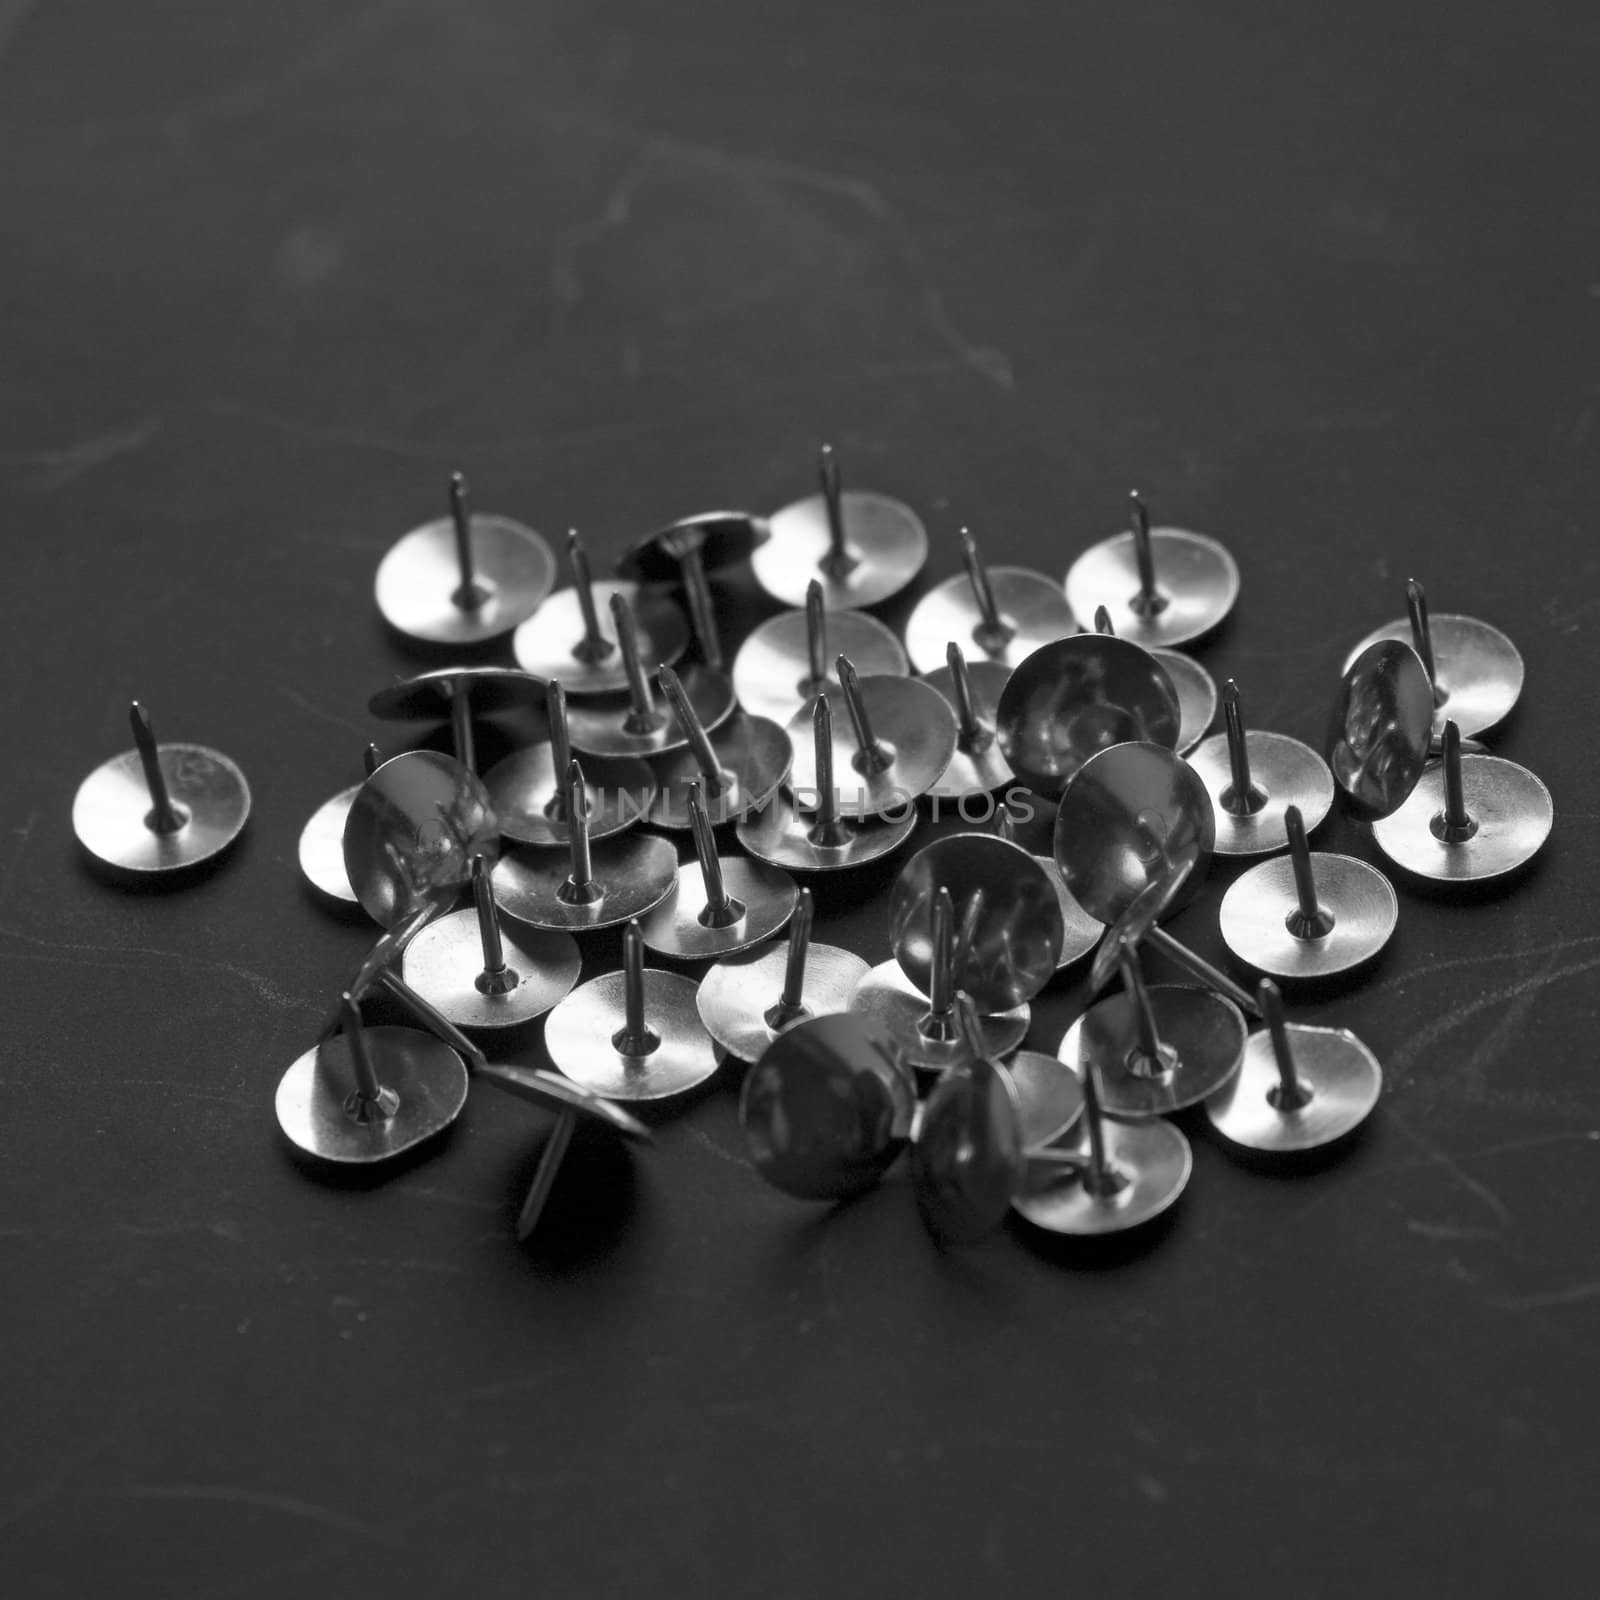 Heap of metal pushpins on a black background